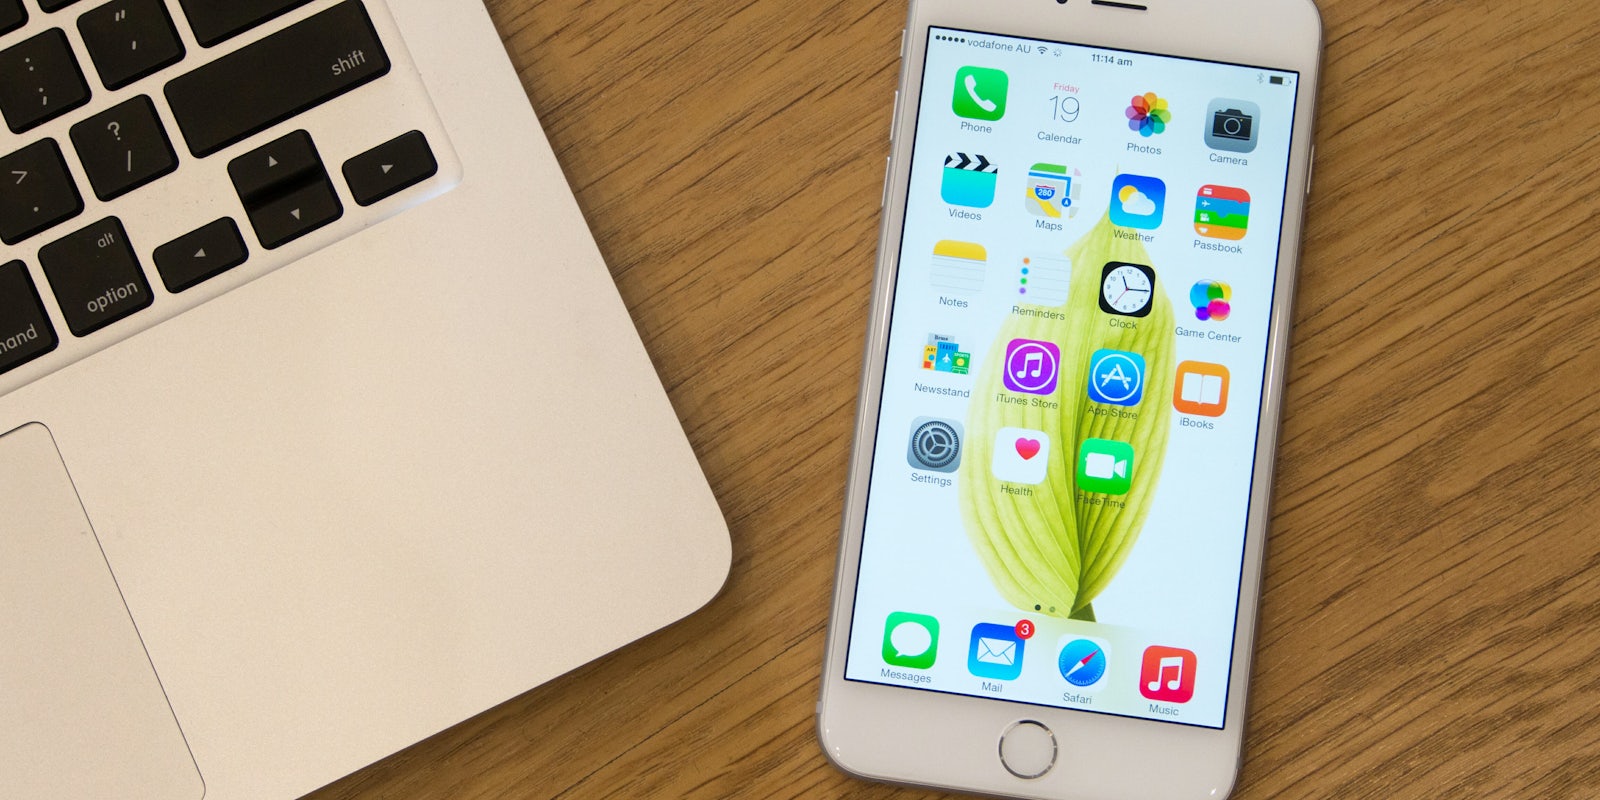 iPhone 6 Plus owners with damaged phones might be eligible for a free upgrade.